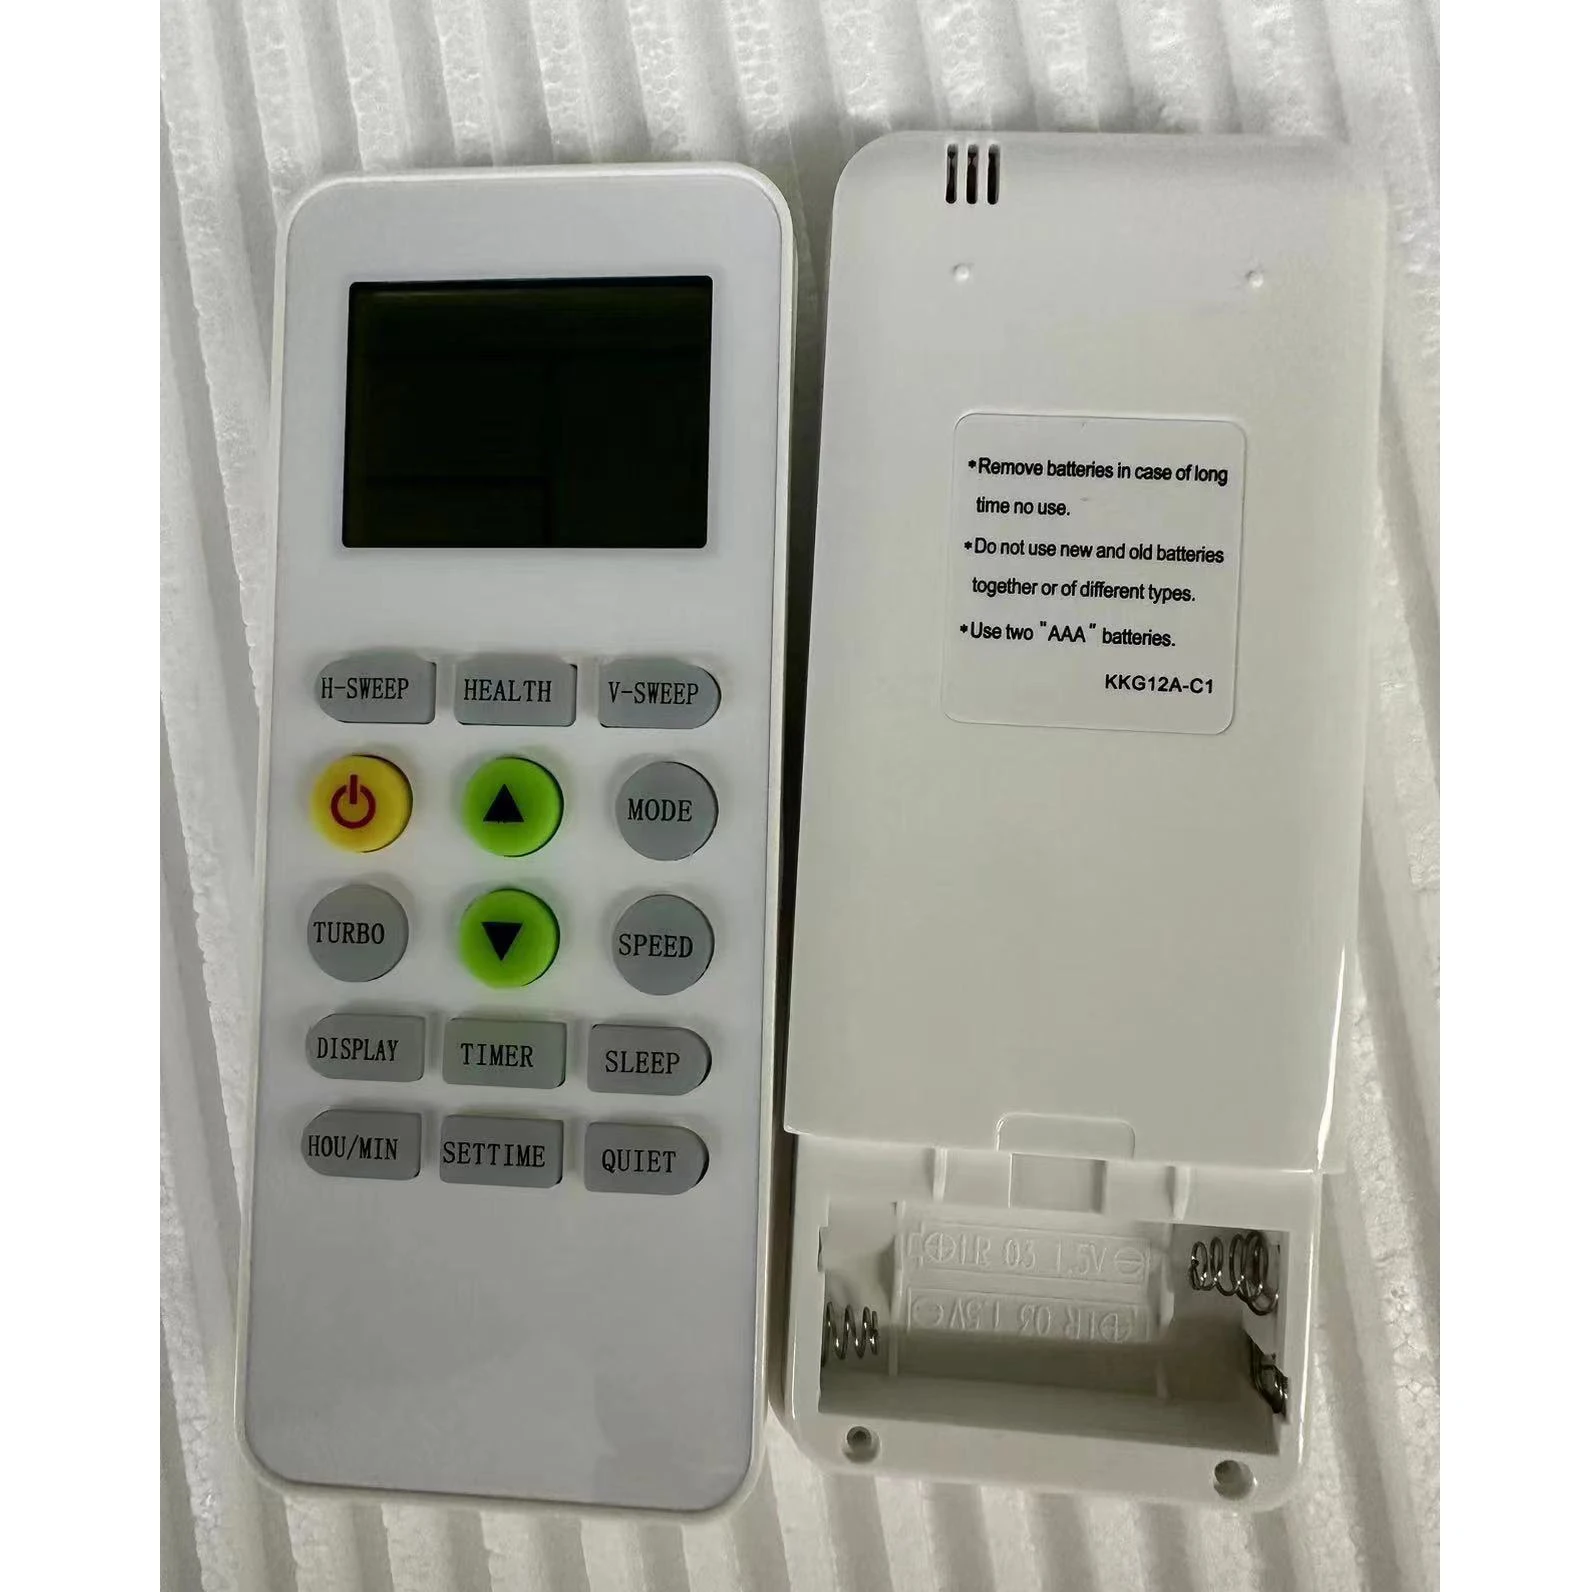 KKG12A-C1 air conditioner Remote Control Replacement for CHANGHONG REE Pastamic CHEBLO Air Conditioner